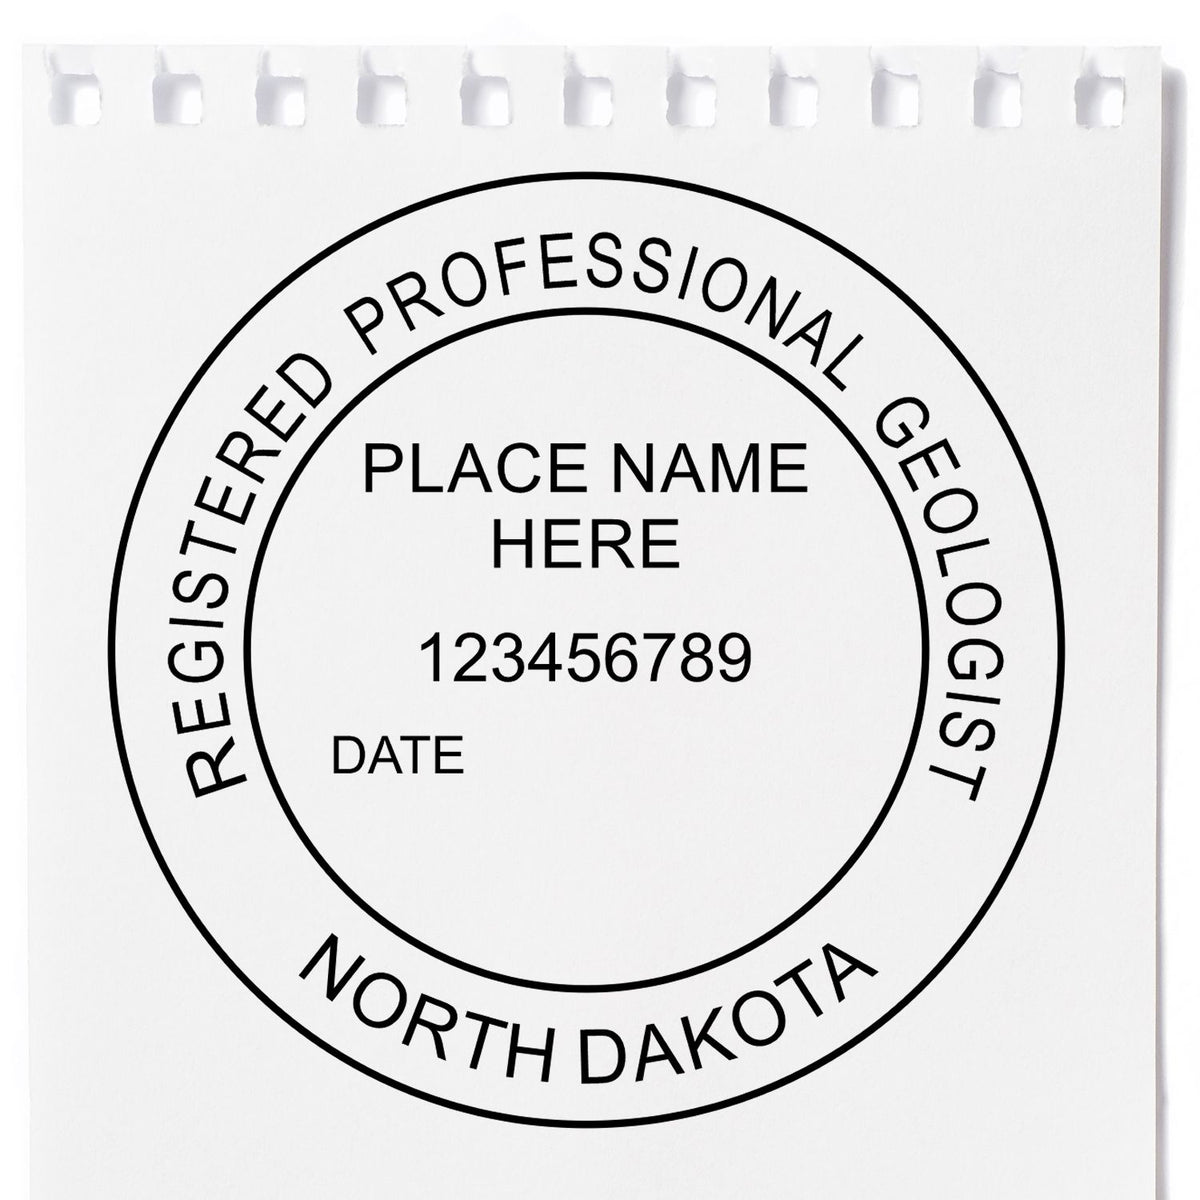 This paper is stamped with a sample imprint of the Premium MaxLight Pre-Inked North Dakota Geology Stamp, signifying its quality and reliability.